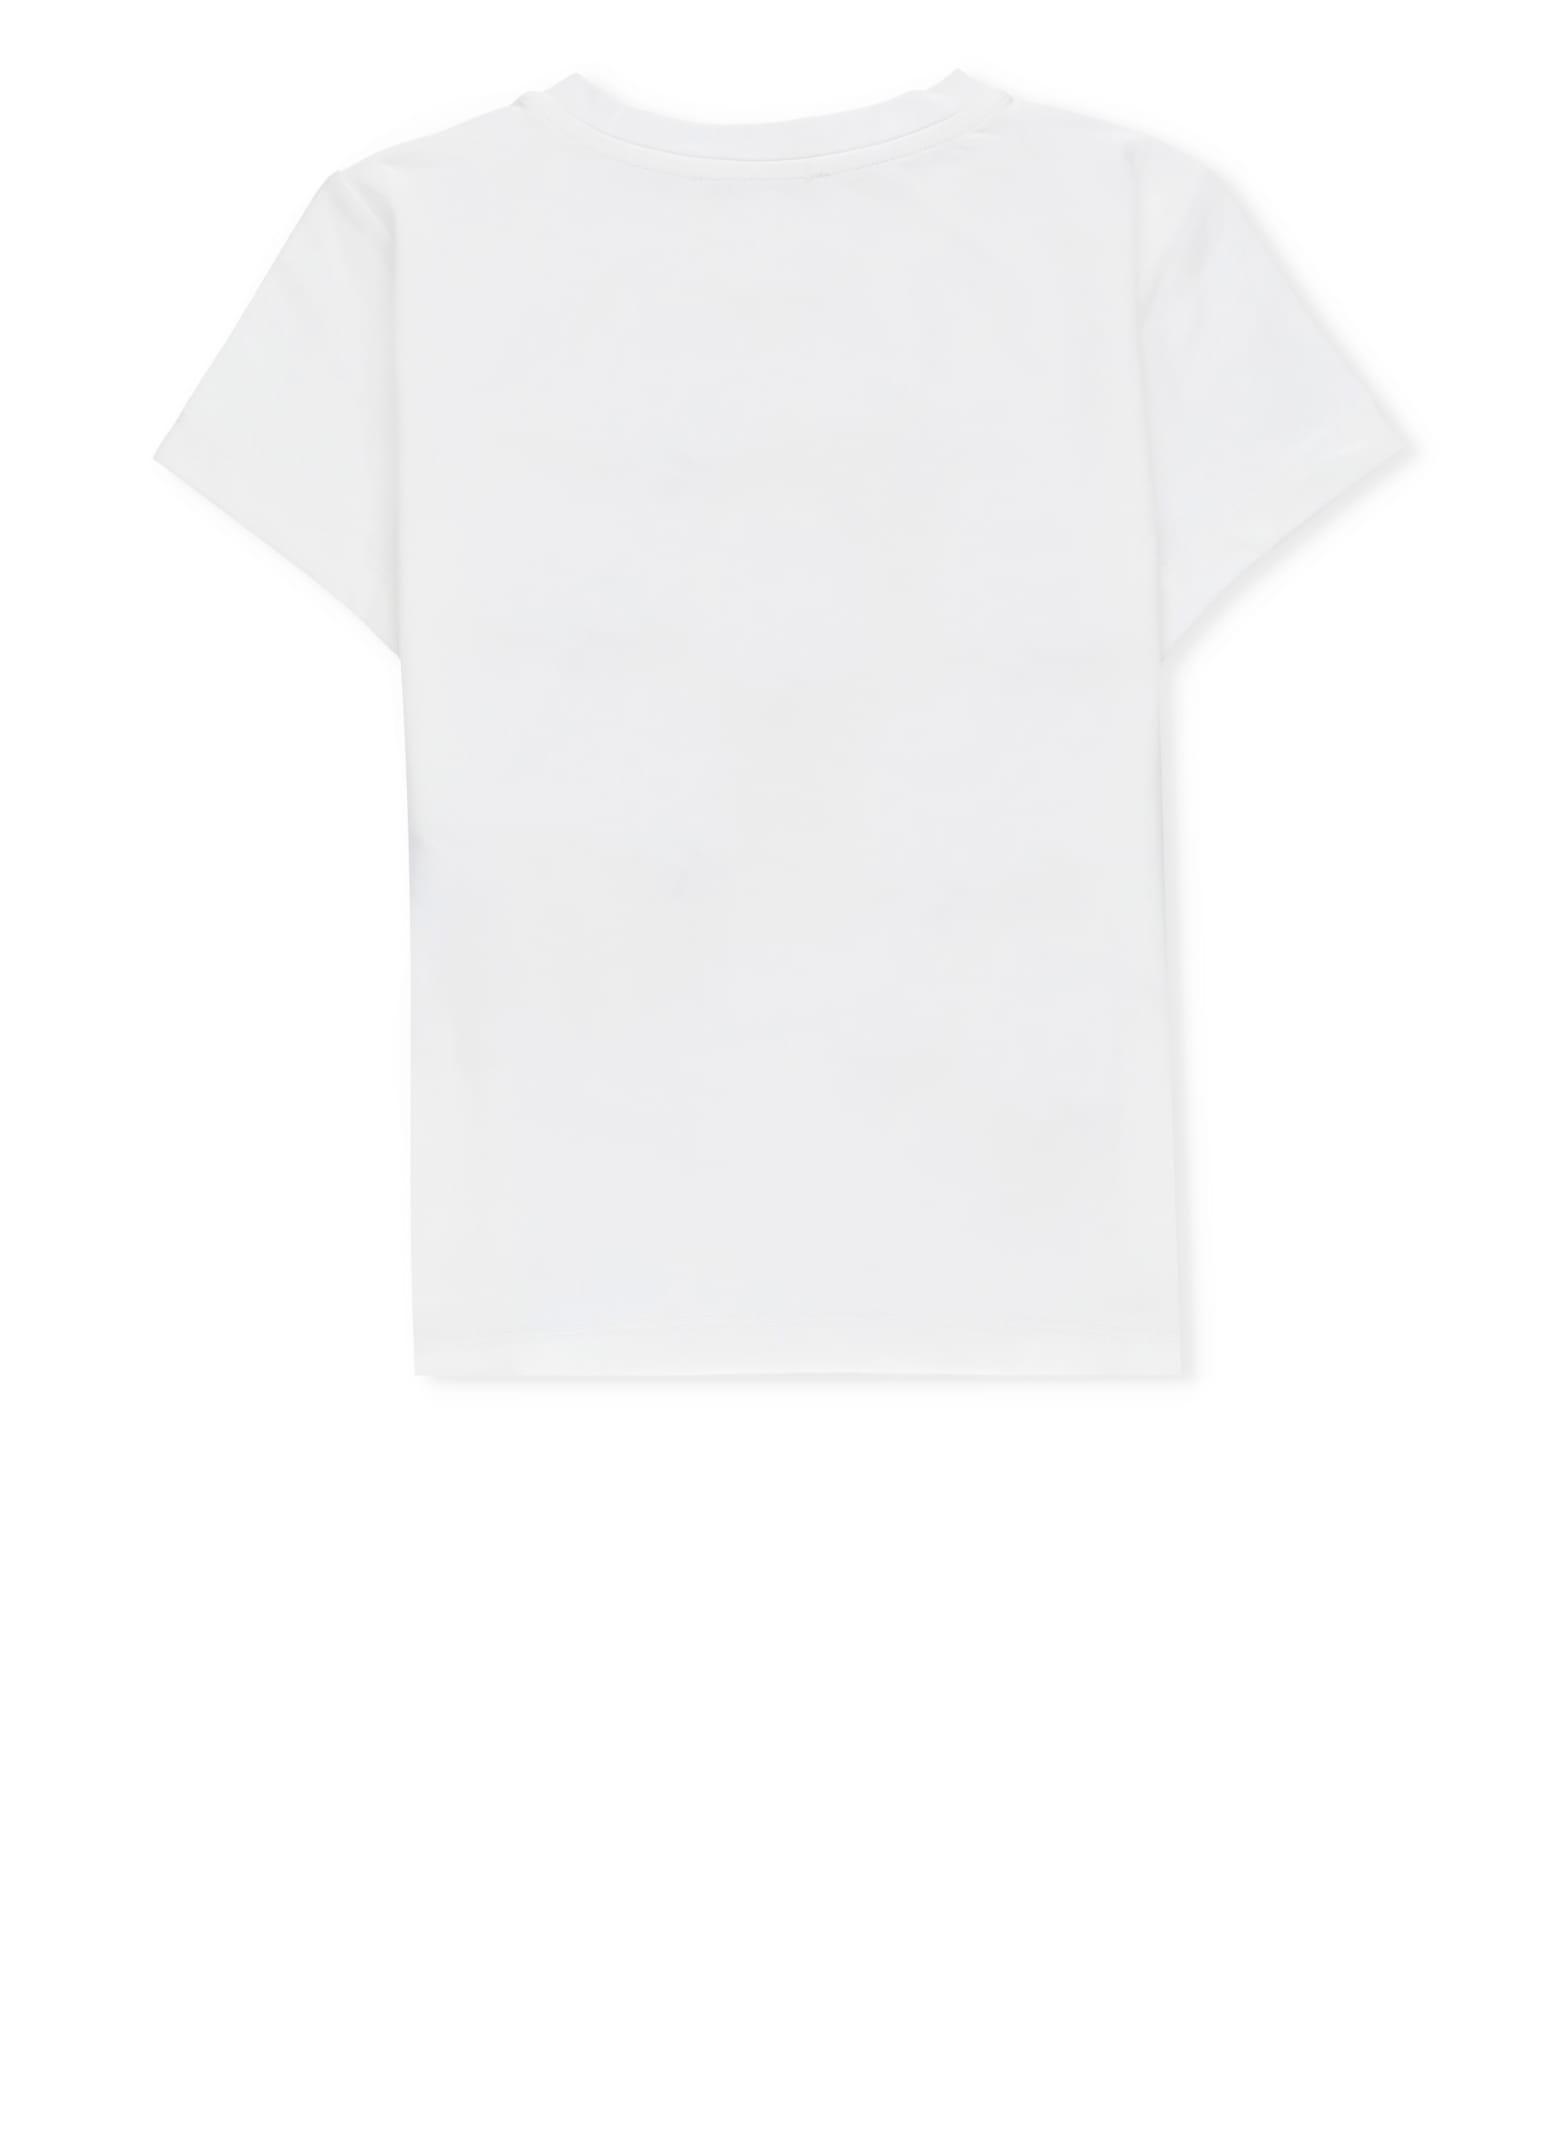 Shop Twinset T-shirt With Print In White